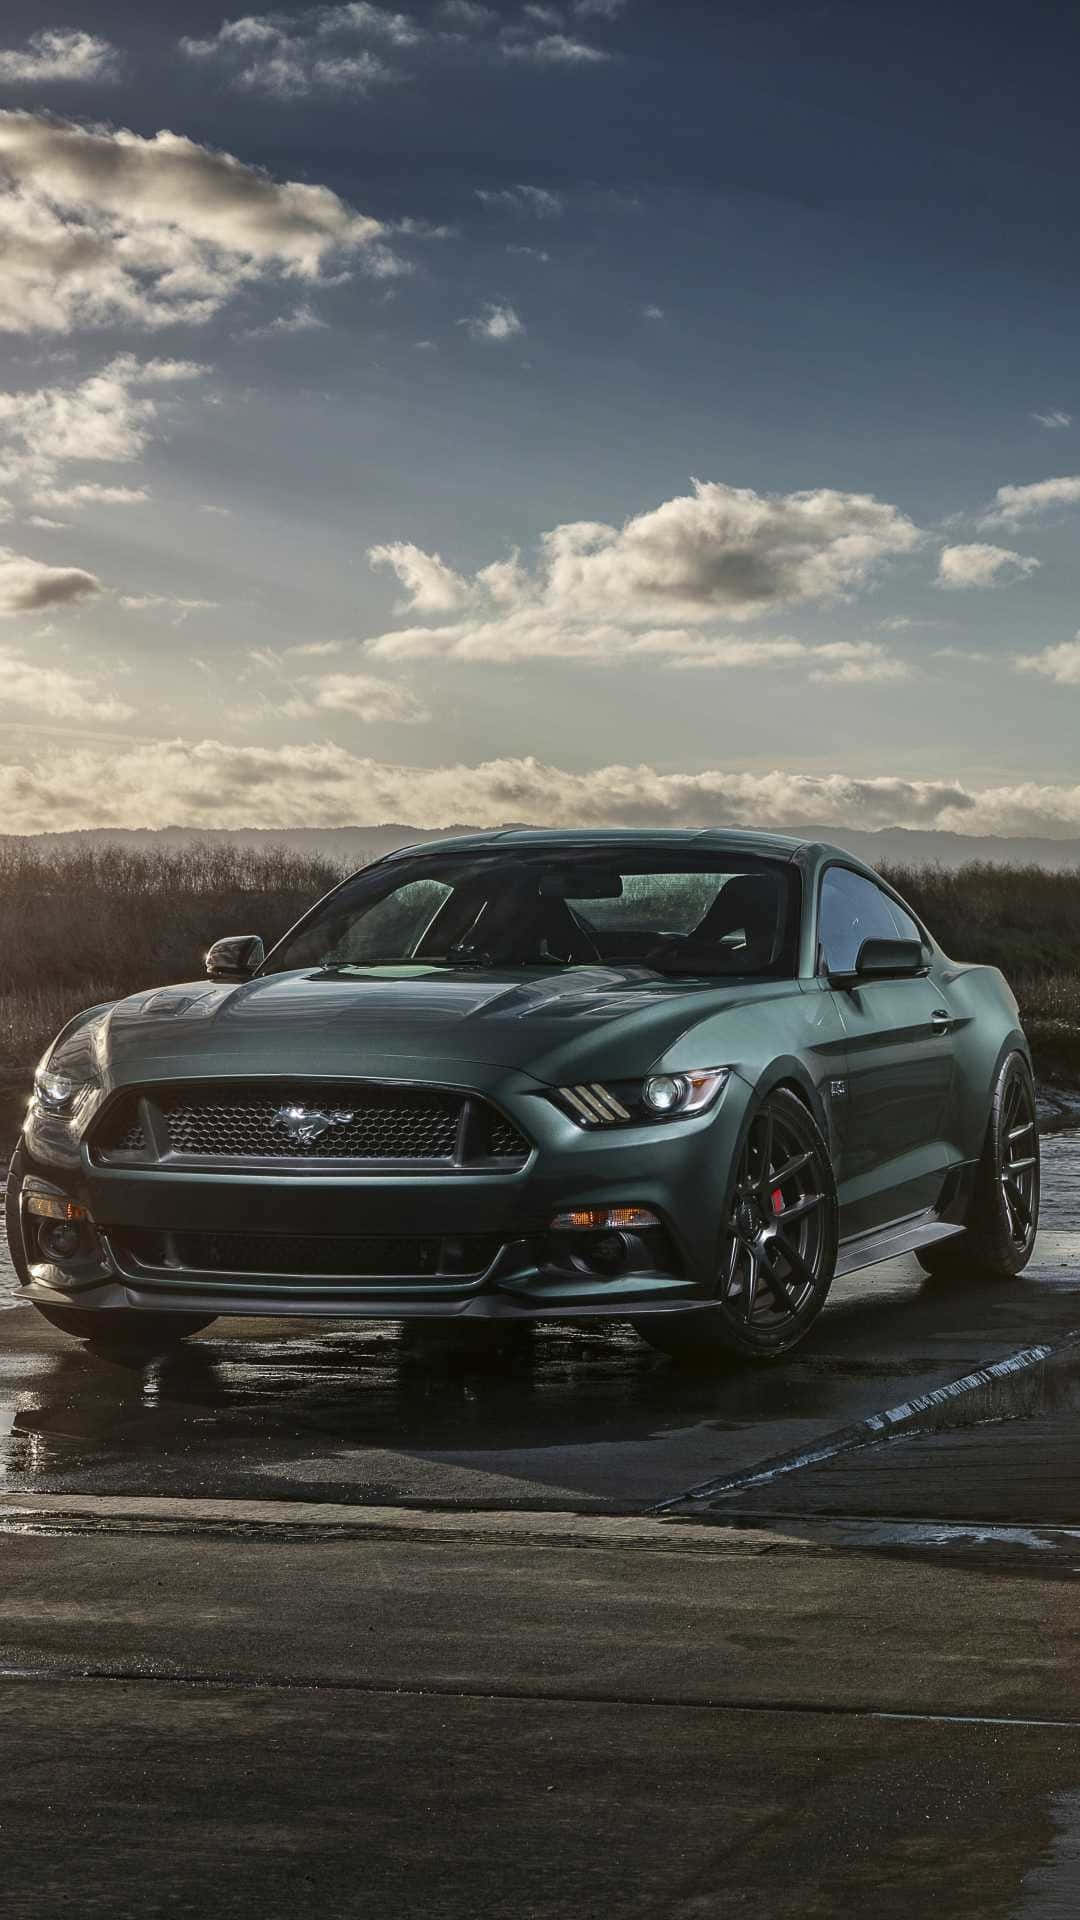 Fast and stylish, the Mustang iPhone is here for a powerful and unique experience Wallpaper